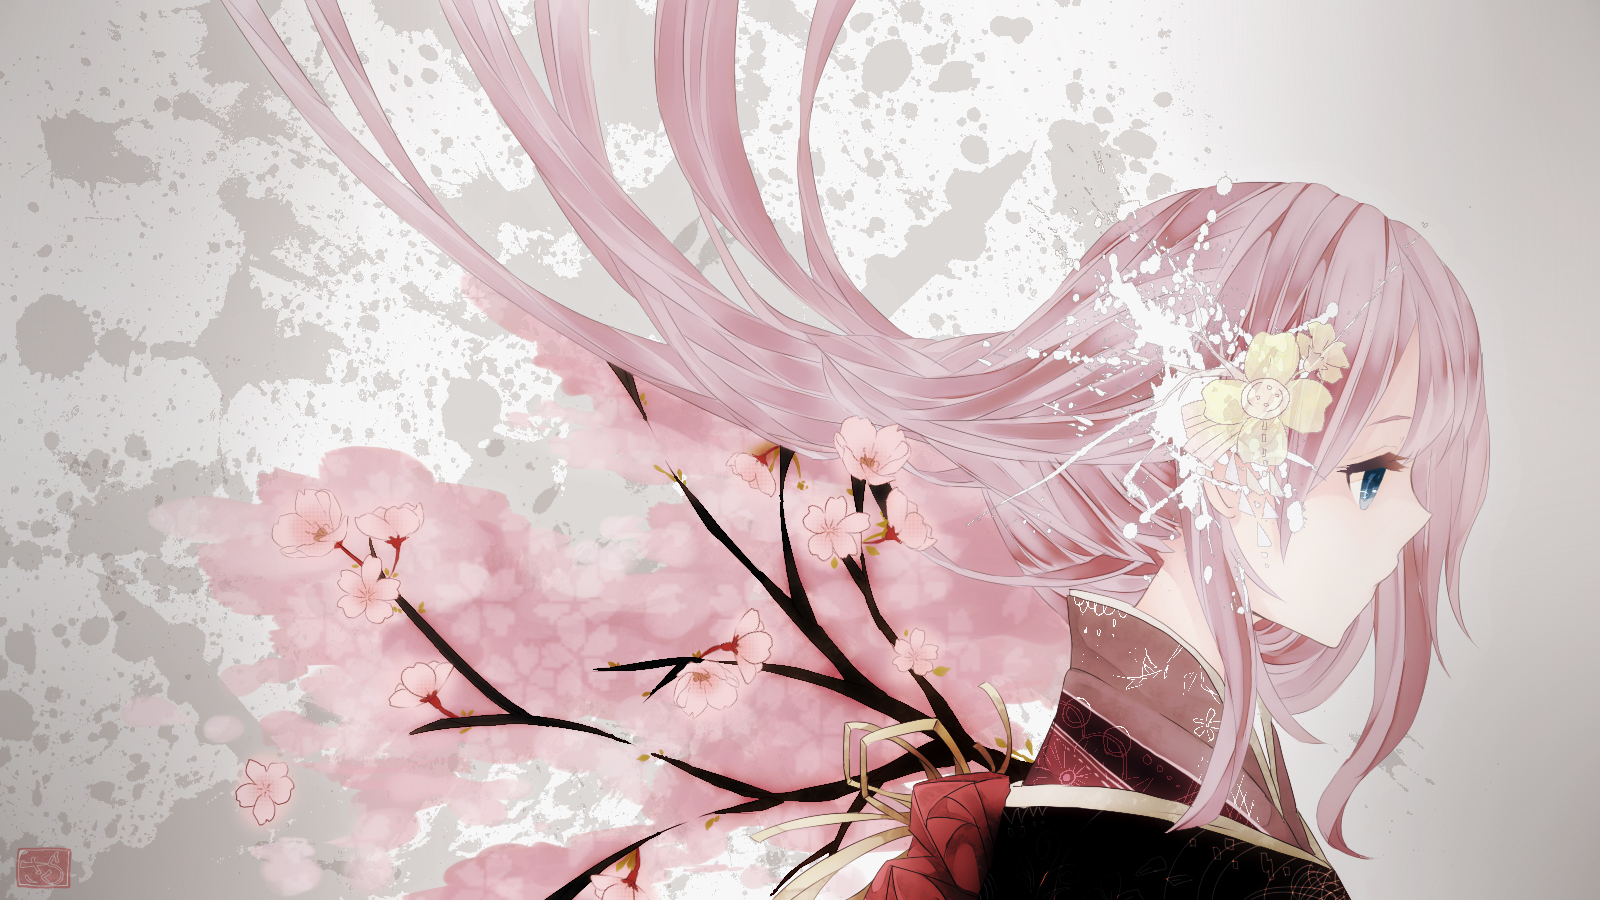 Most popular Megurine Luka wallpapers Megurine Luka for iPhone desktop  tablet devices and also for samsung and Xiaomi mobile phones  Page 1